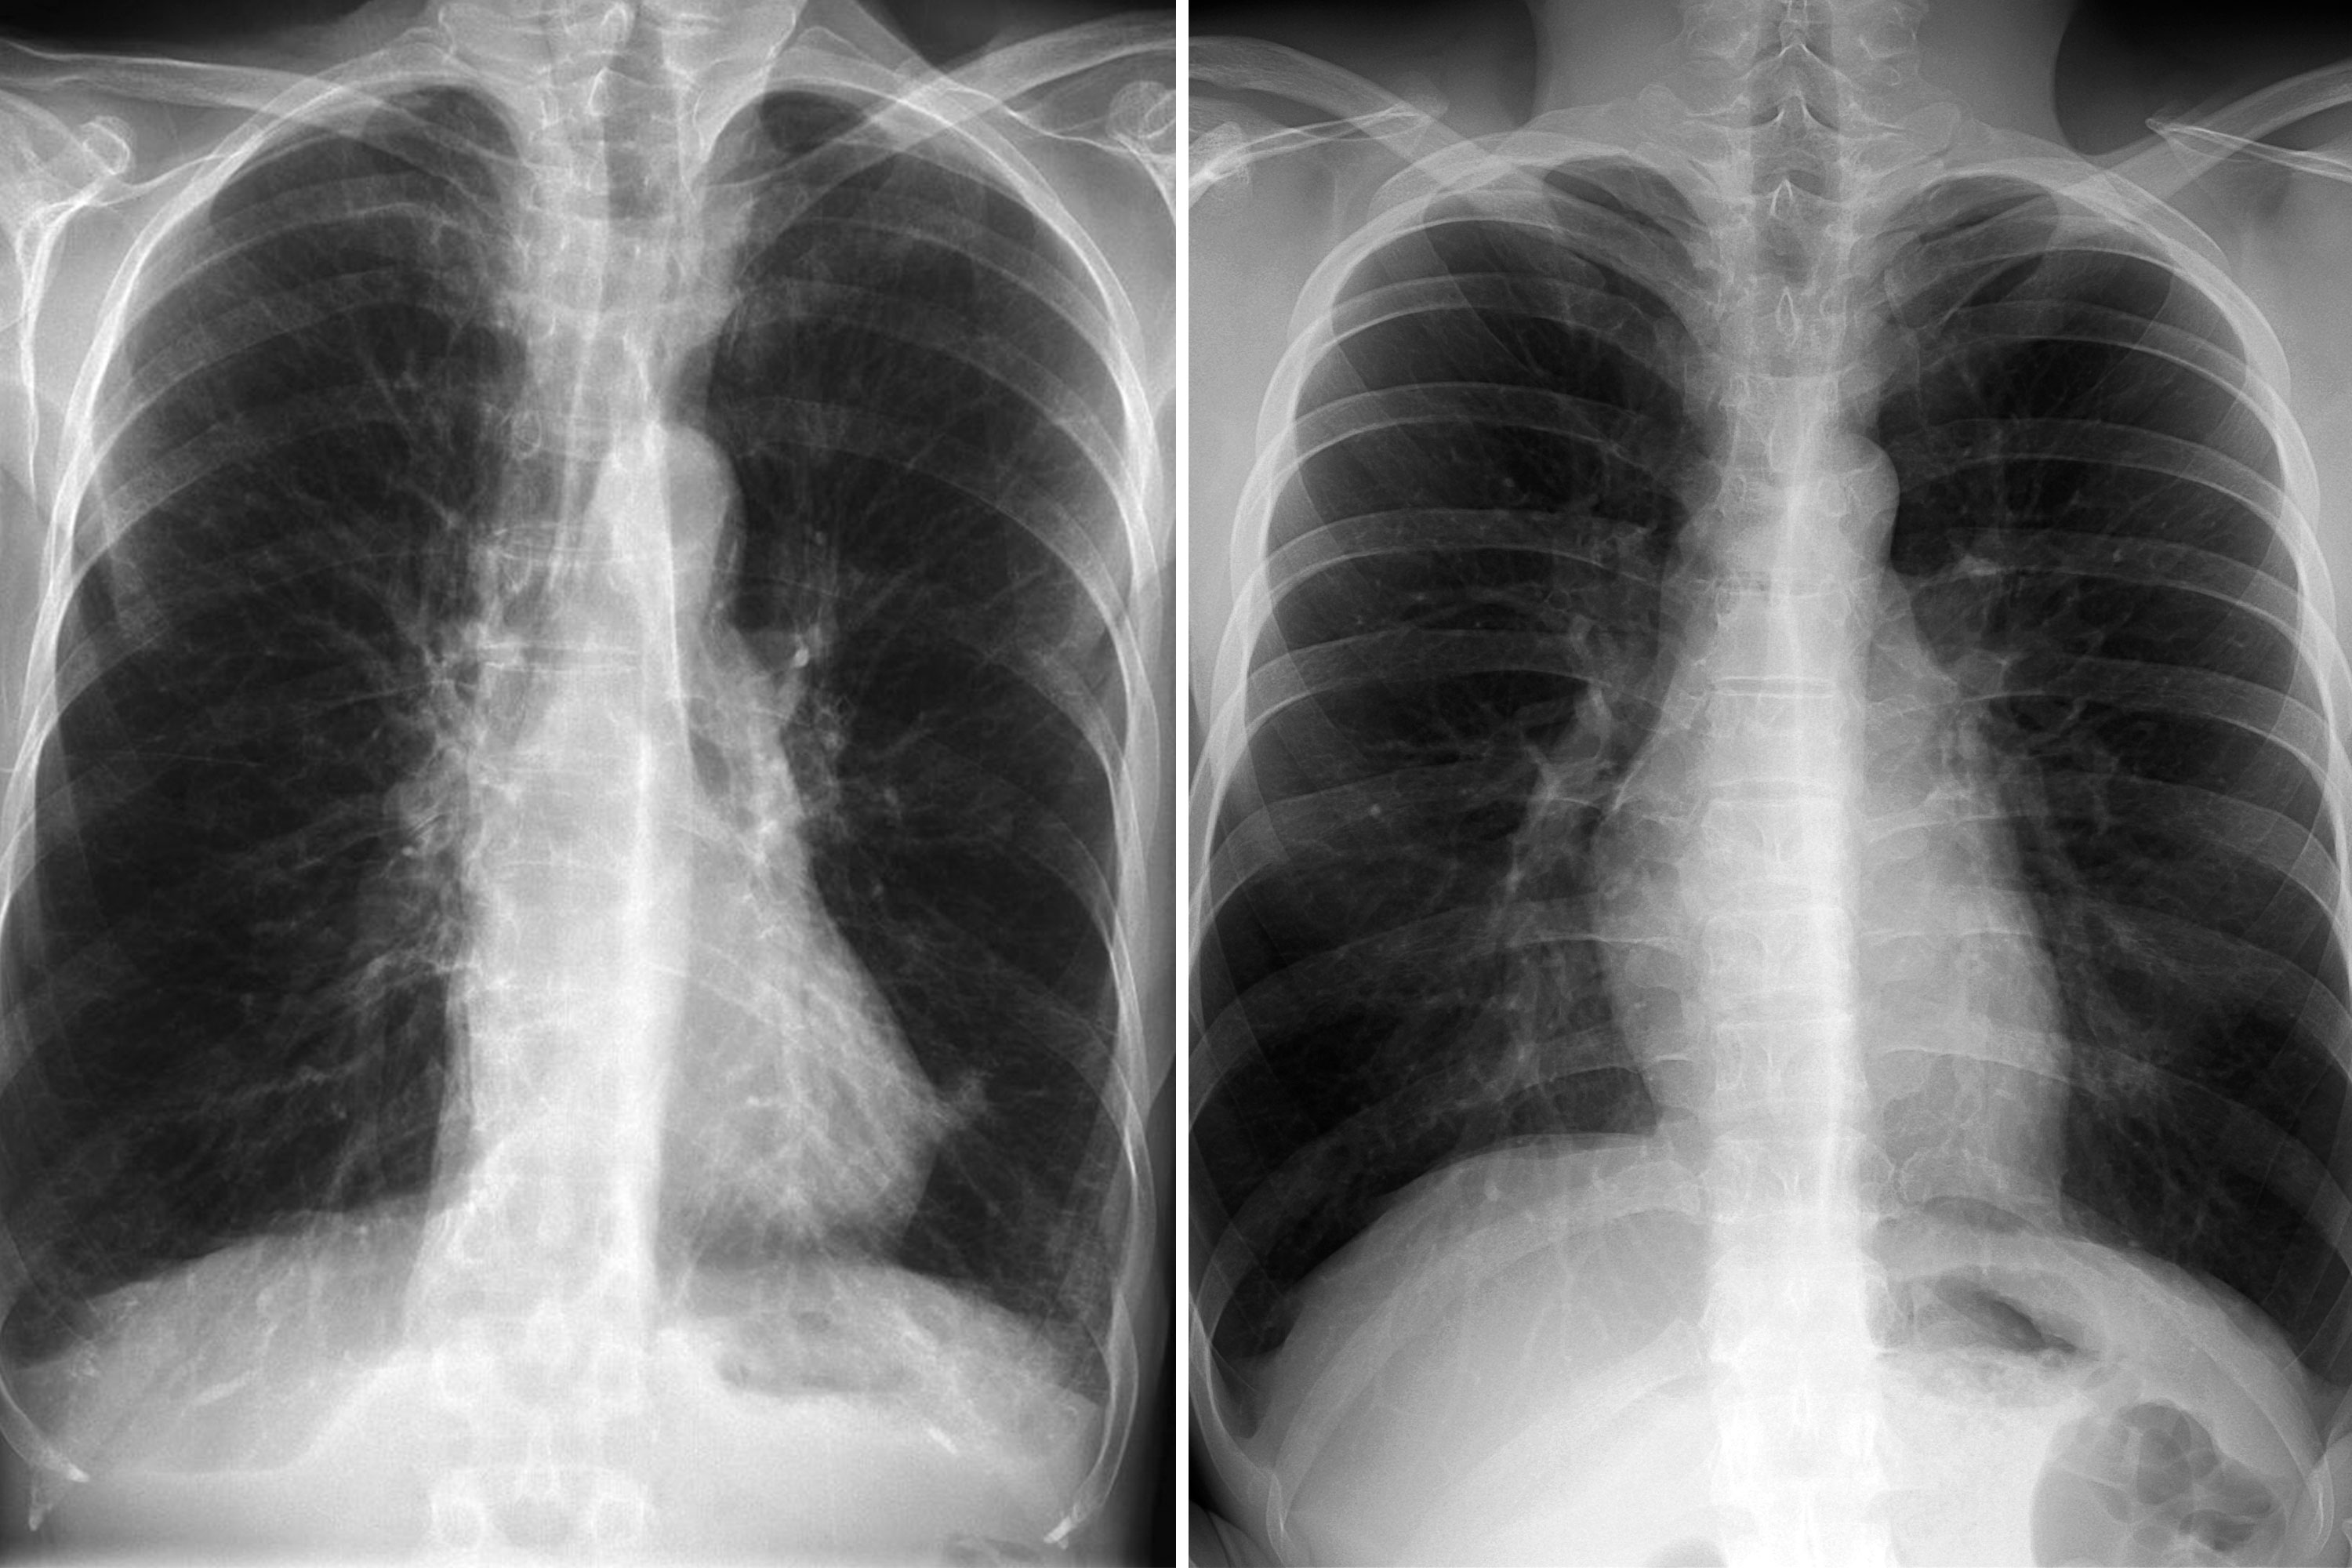 COPD Lungs vs. Normal Lungs on Medical Scans